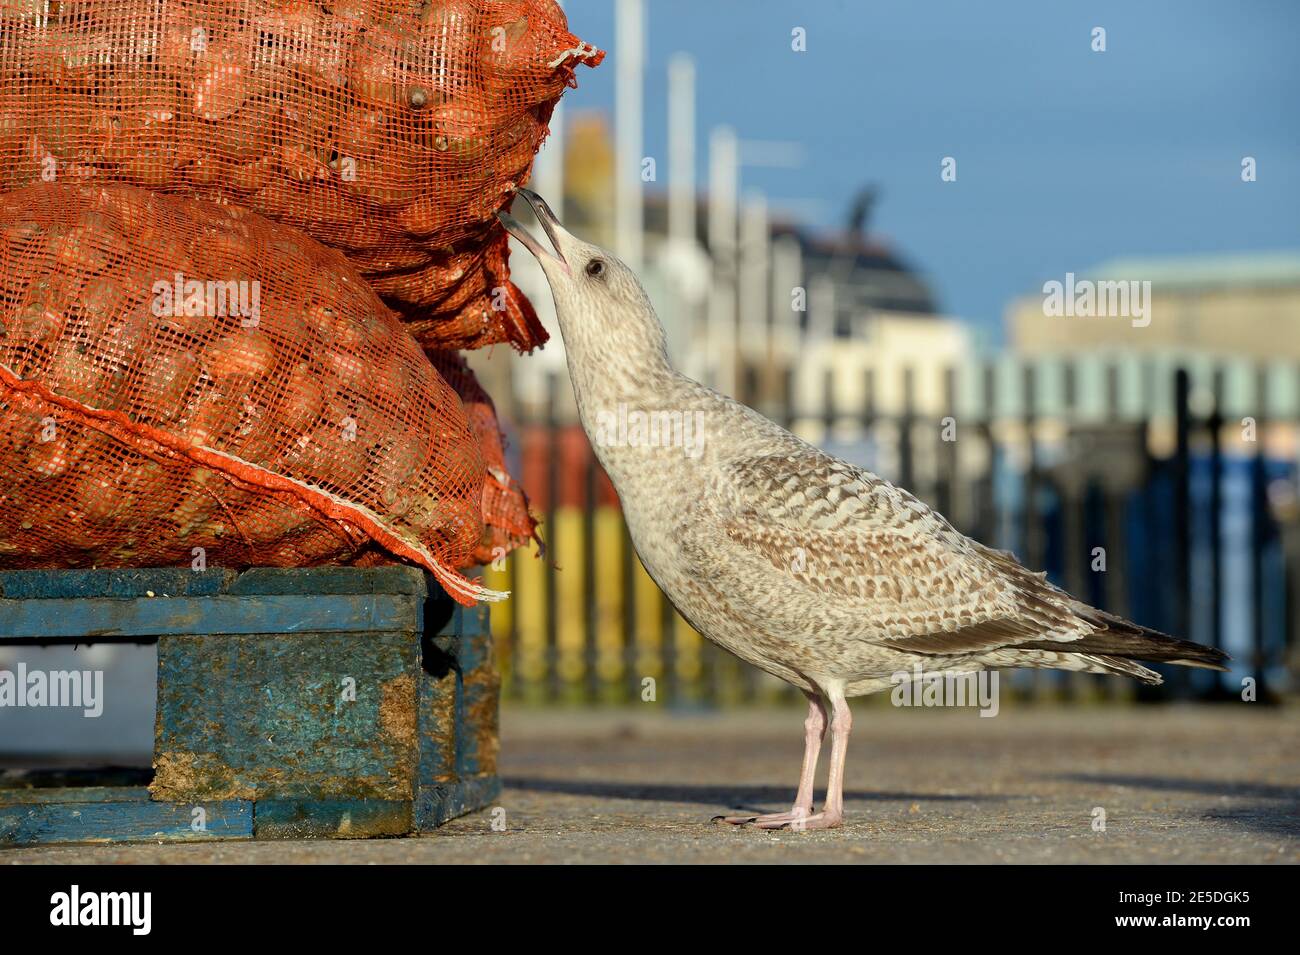 A seagull eats cockles from a fisherman's catch Stock Photo